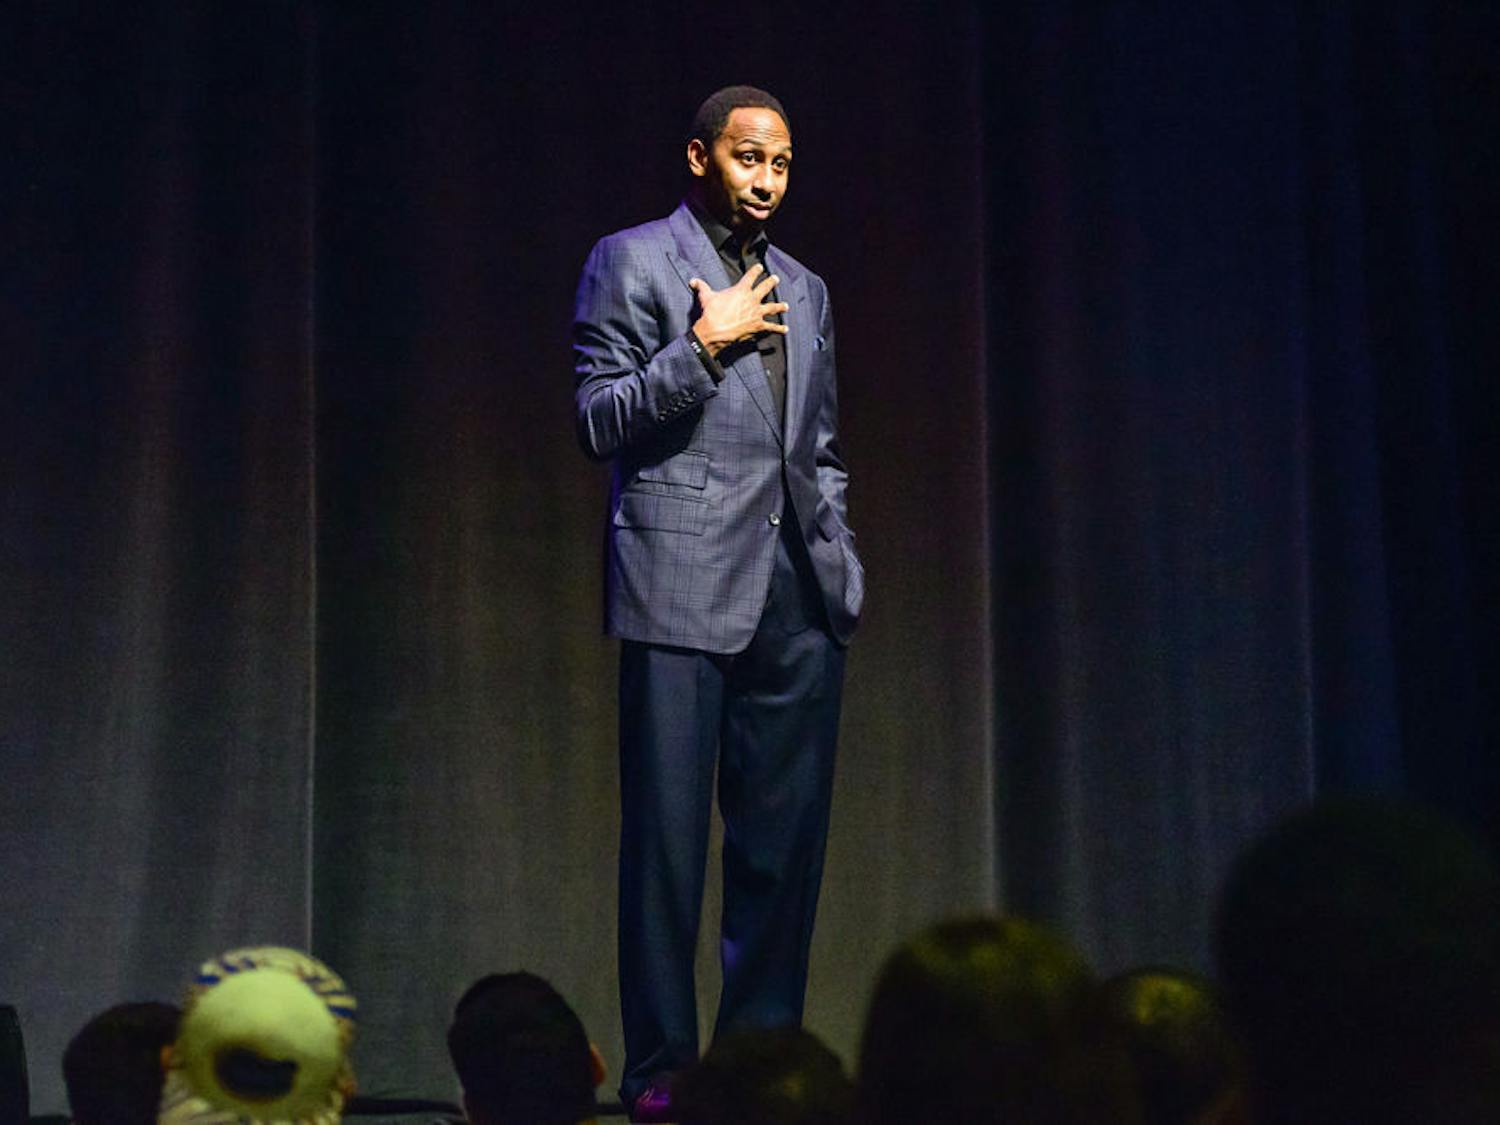 ESPN columnist, sports analyst and radio host Stephen A. Smith speaks to students at the Phillips Center for the Performing Arts on Nov. 12, 2014.